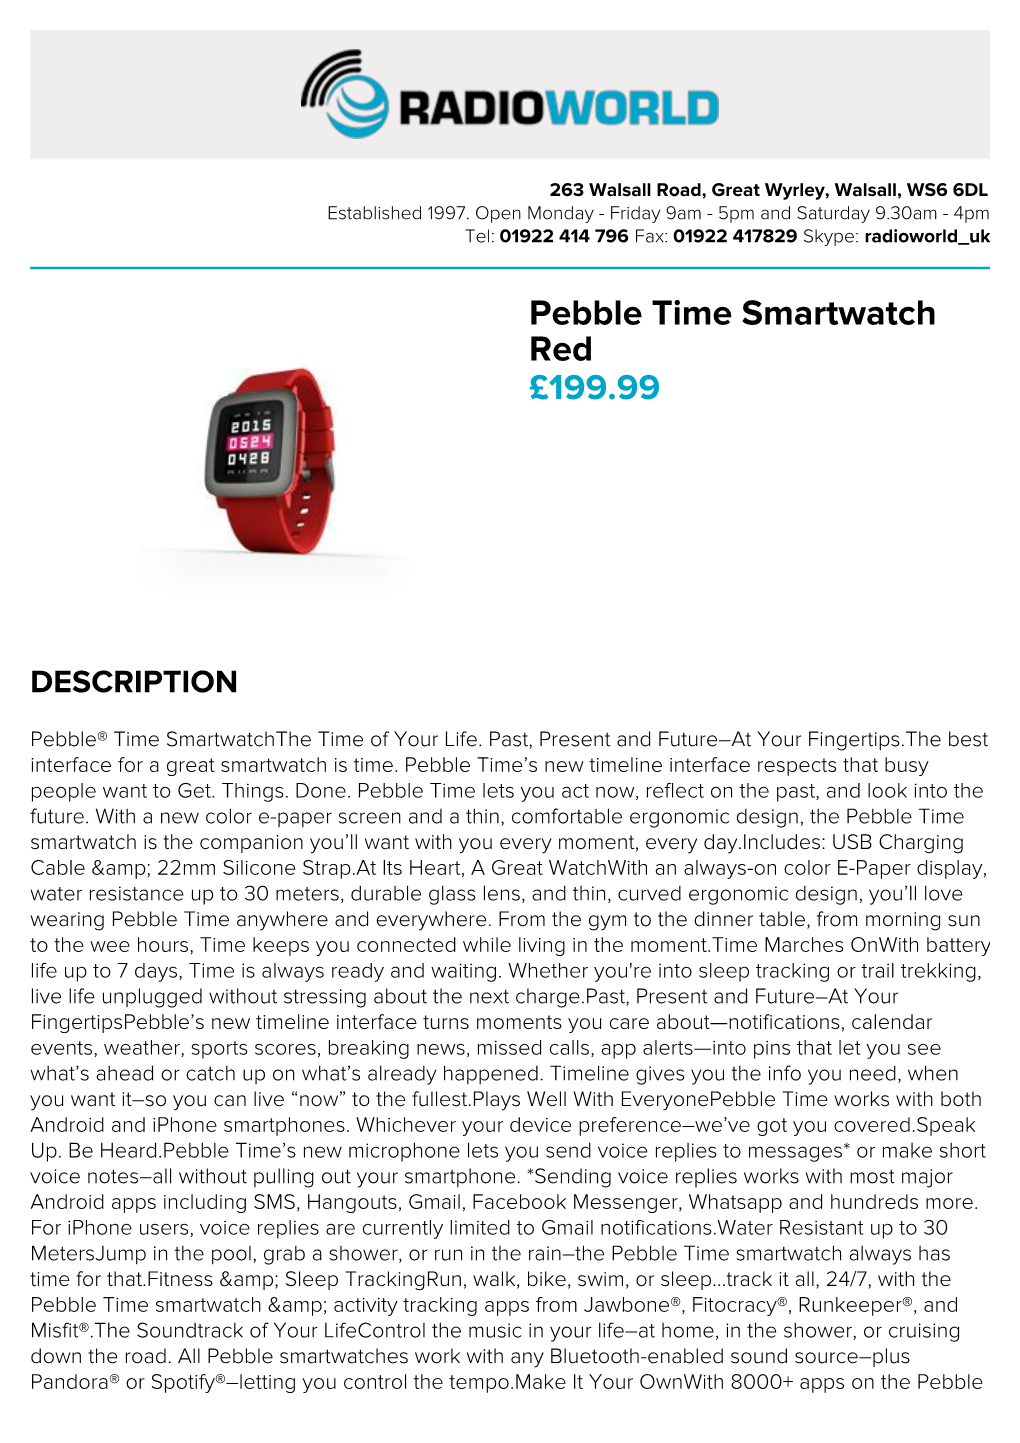 Pebble Time Smartwatch Red £199.99